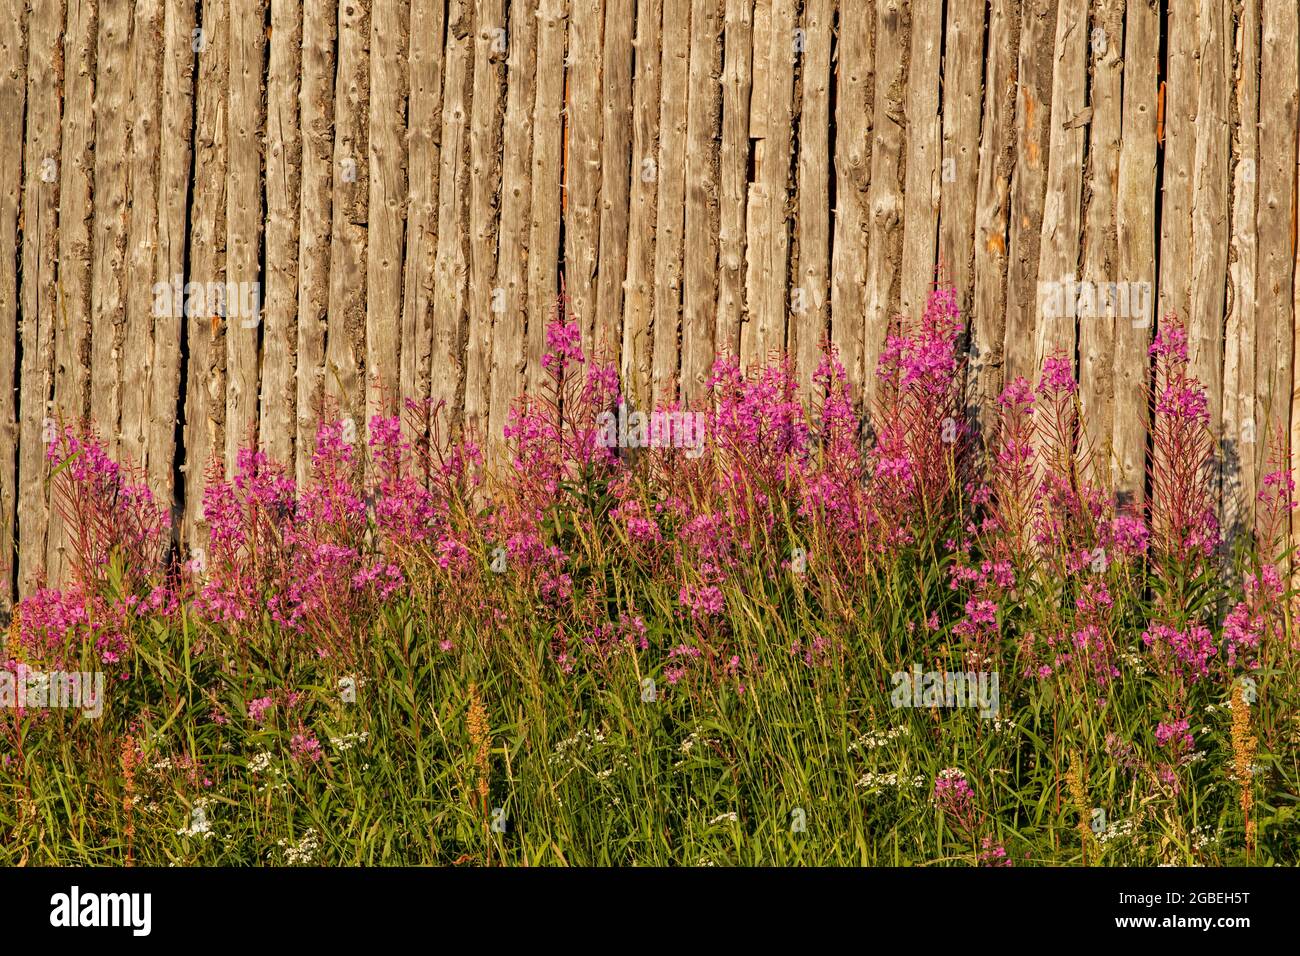 Purple inflorescence and green leaves of the Fireweed (Chamerion angustifolium) growing on old wooden barn wall background Stock Photo